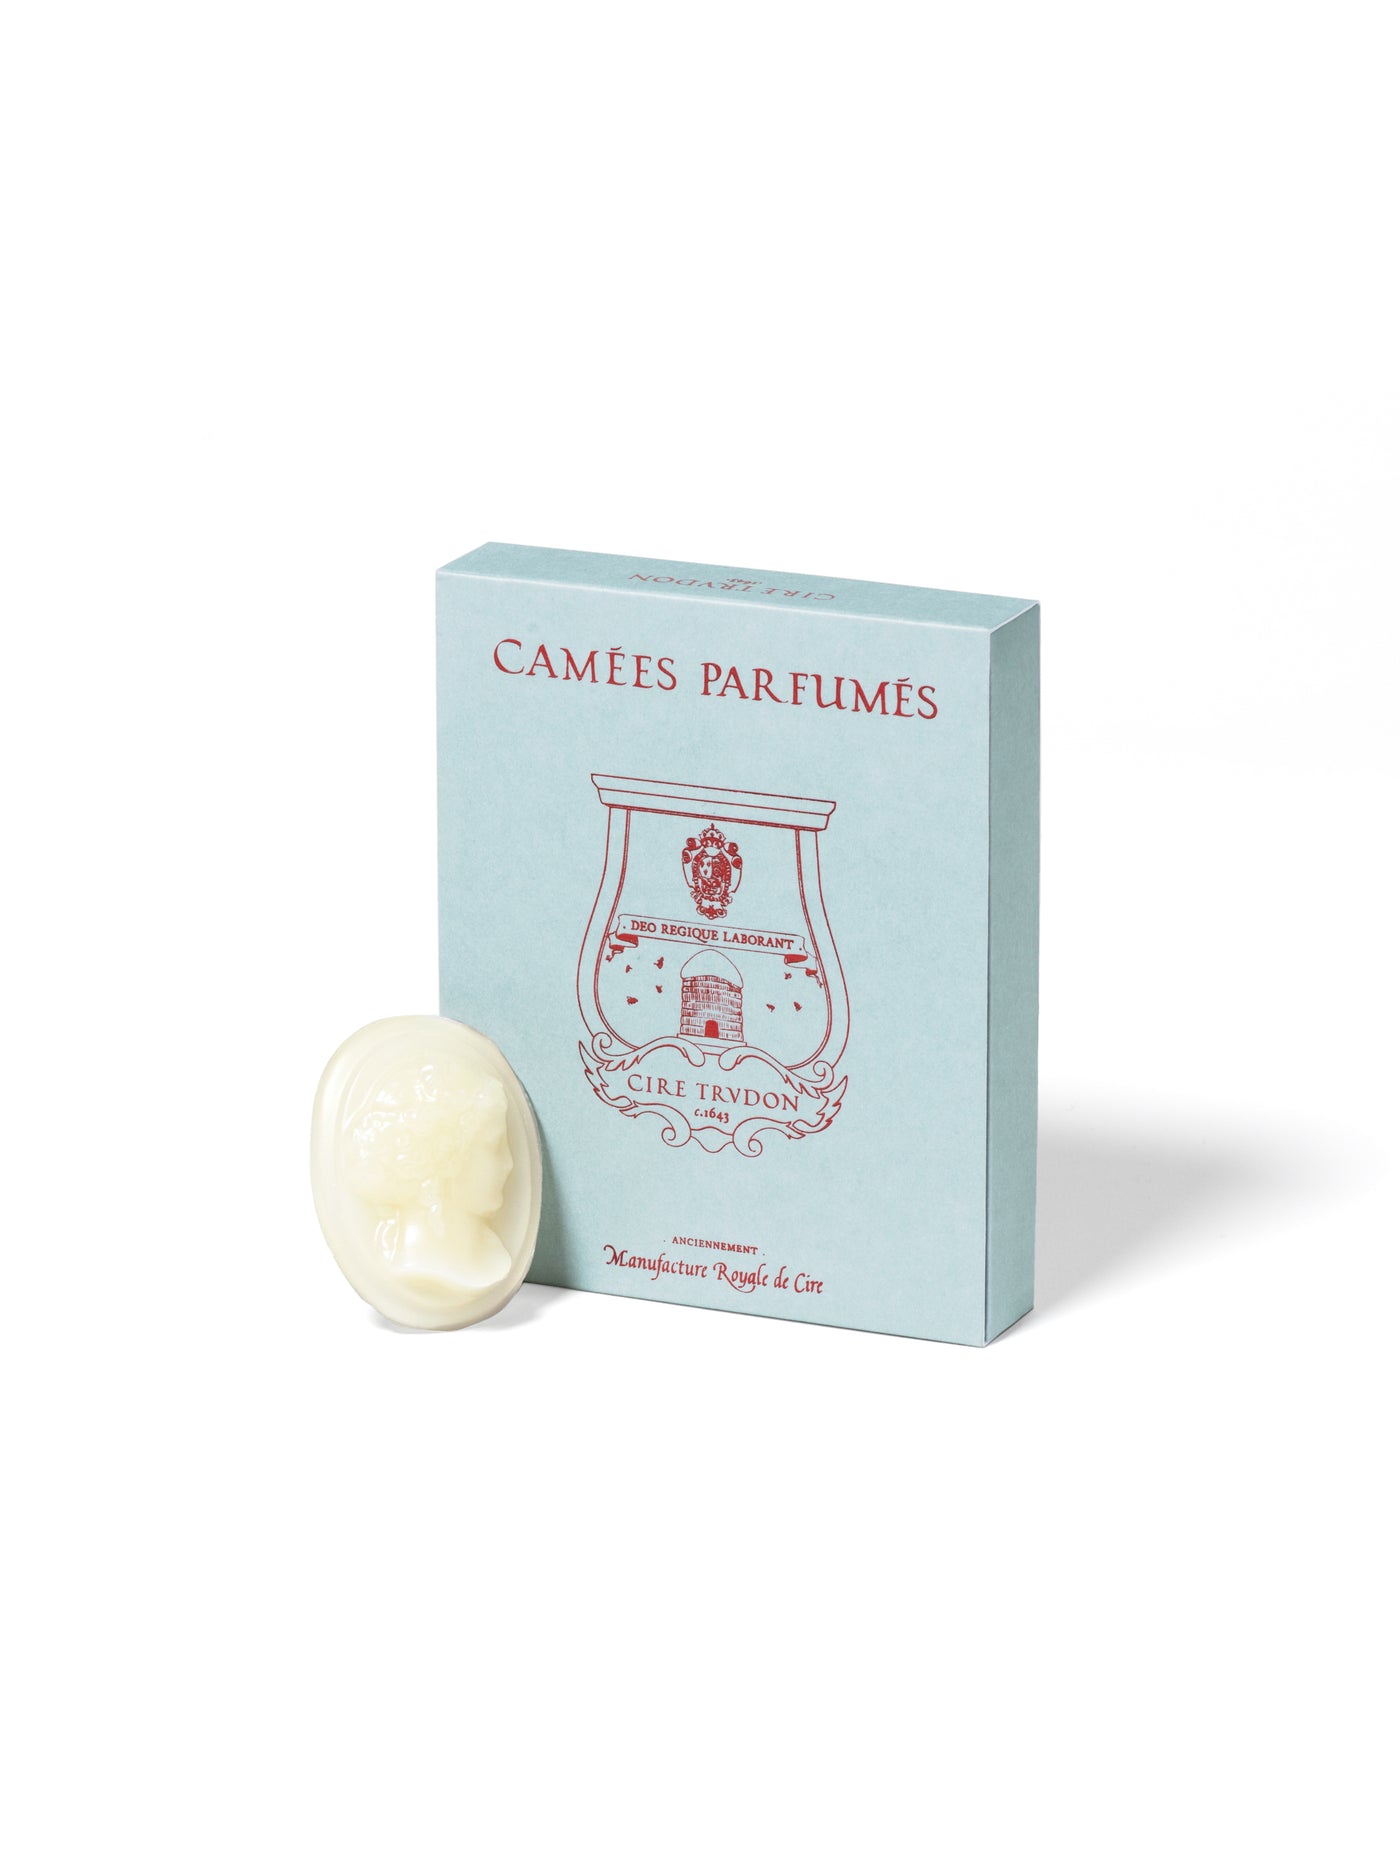 Scented wax cameos (Pkt 4)